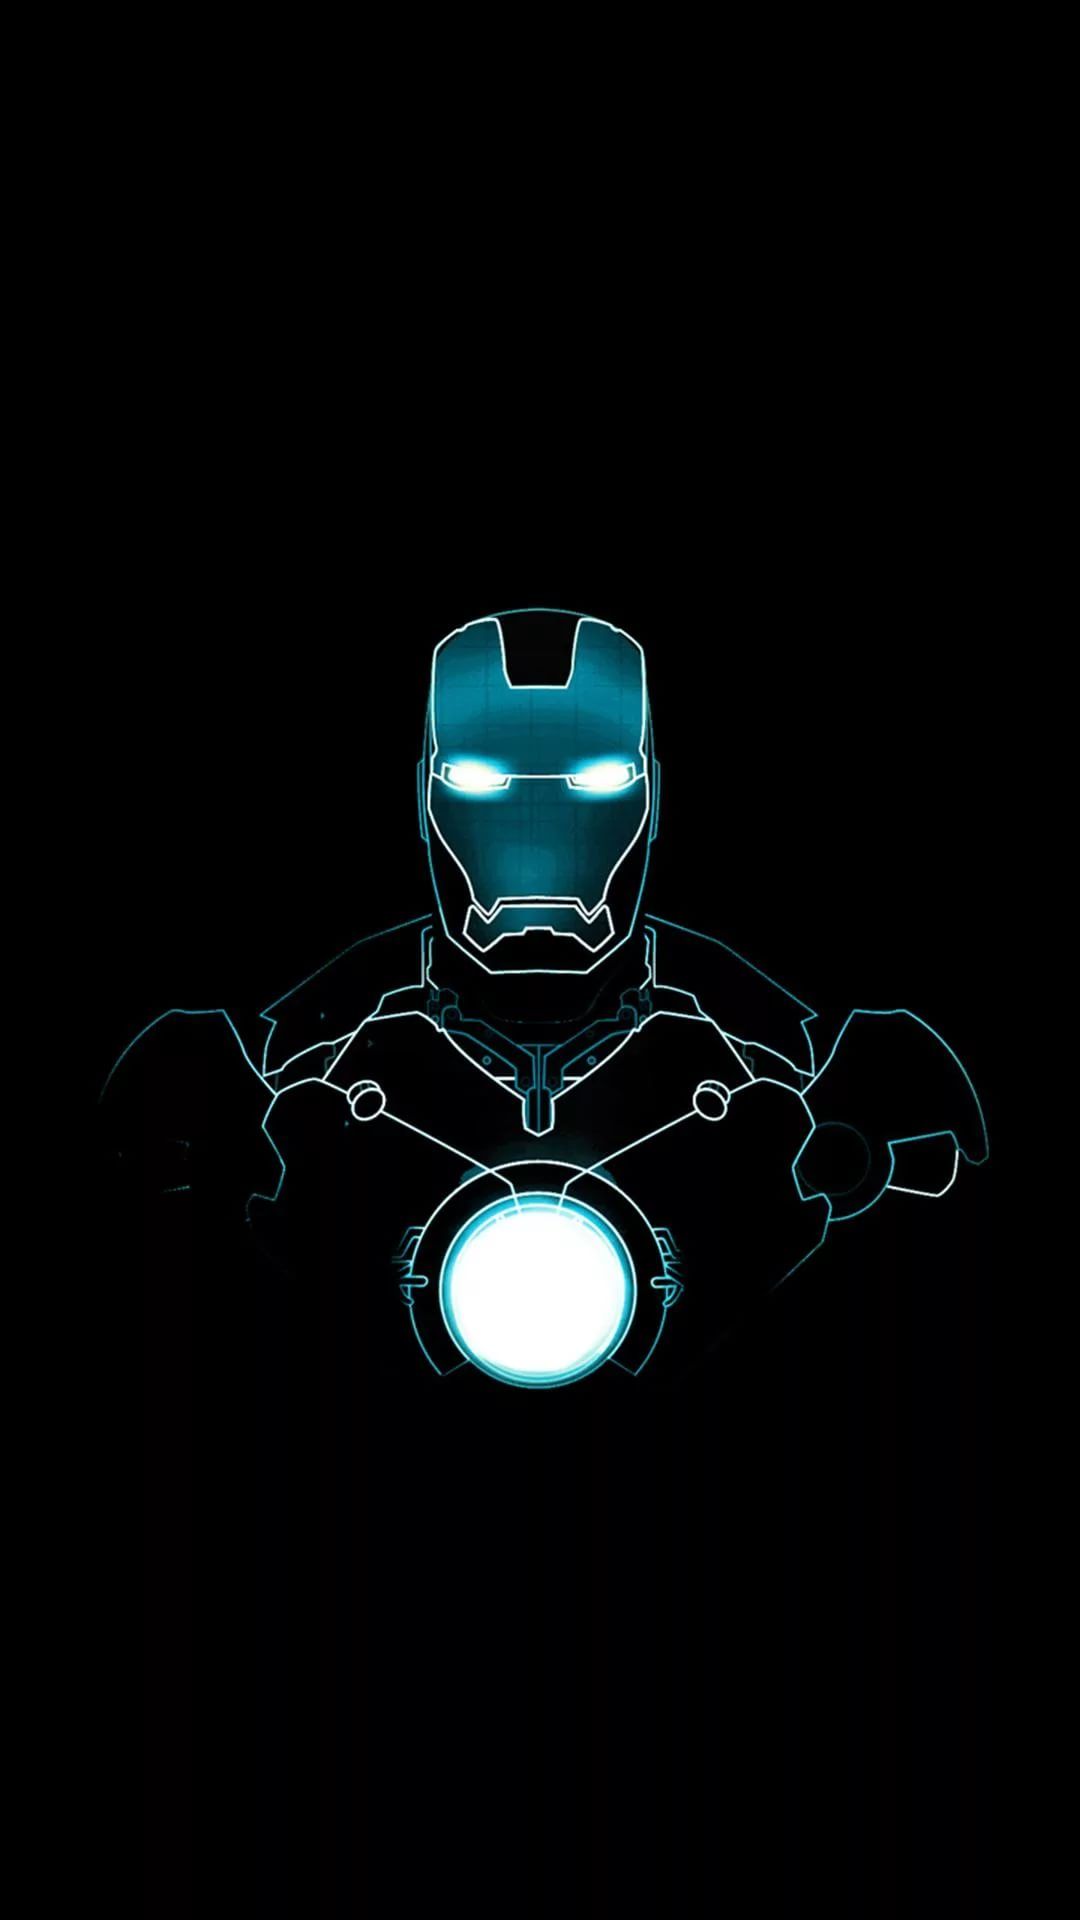 Marvel wallpaper for android